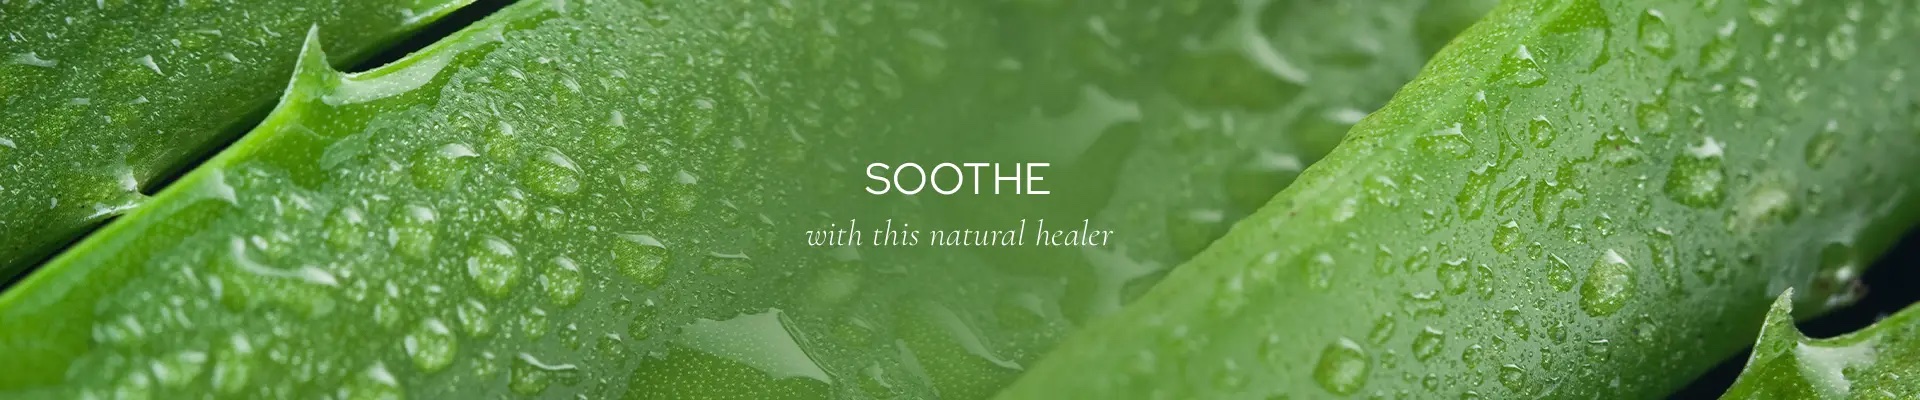 Soothe - with this natural healer